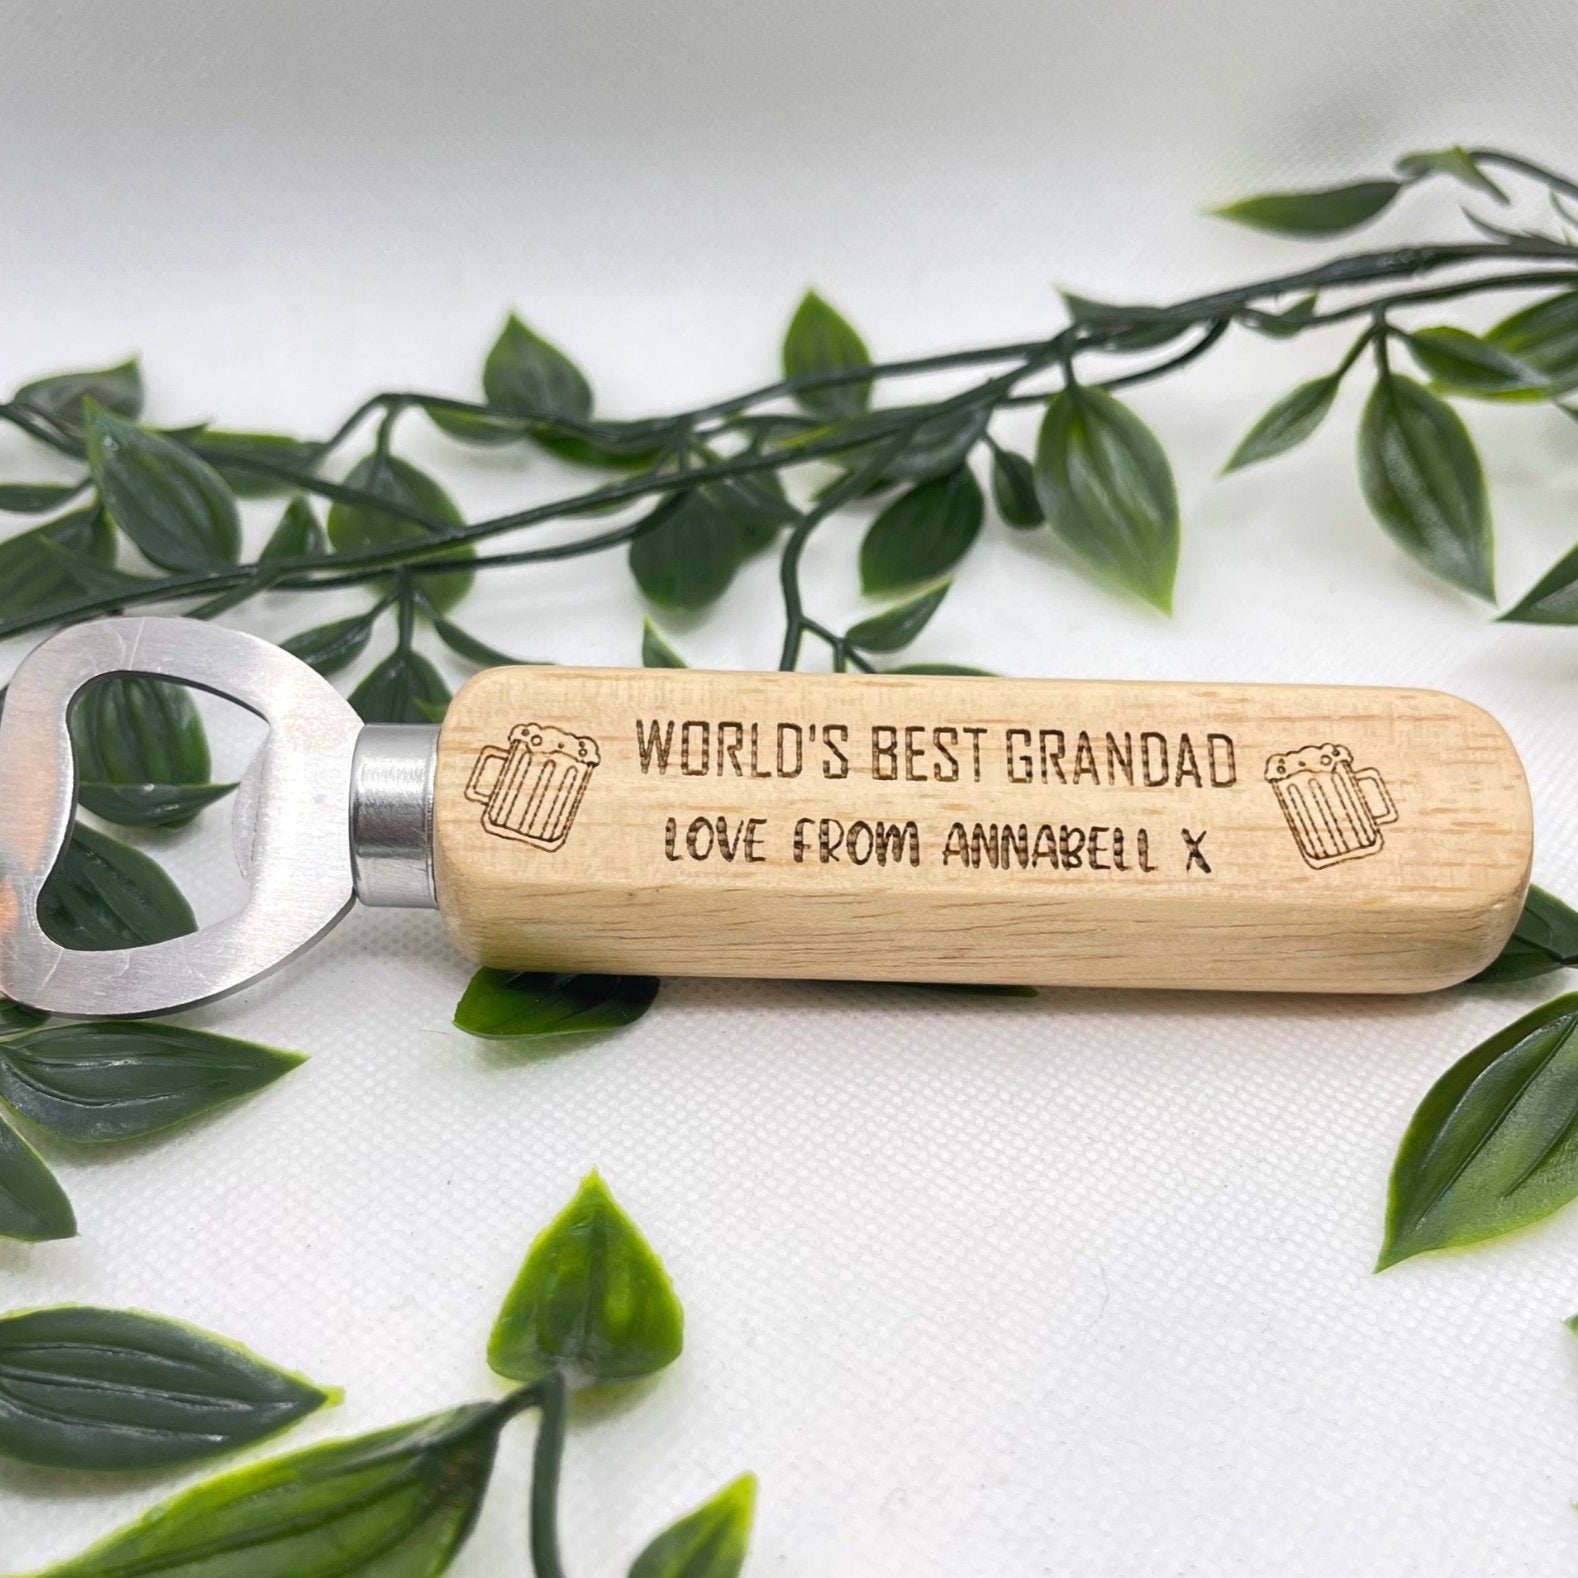 Stylish Personalised Wooden Bottle Opener - Crafted from premium wood and stainless steel - Customise with 'World's Best' engraving - Add a special 'love from' message - Whimsical beer jug icon - A thoughtful and unique gift for any occasion.